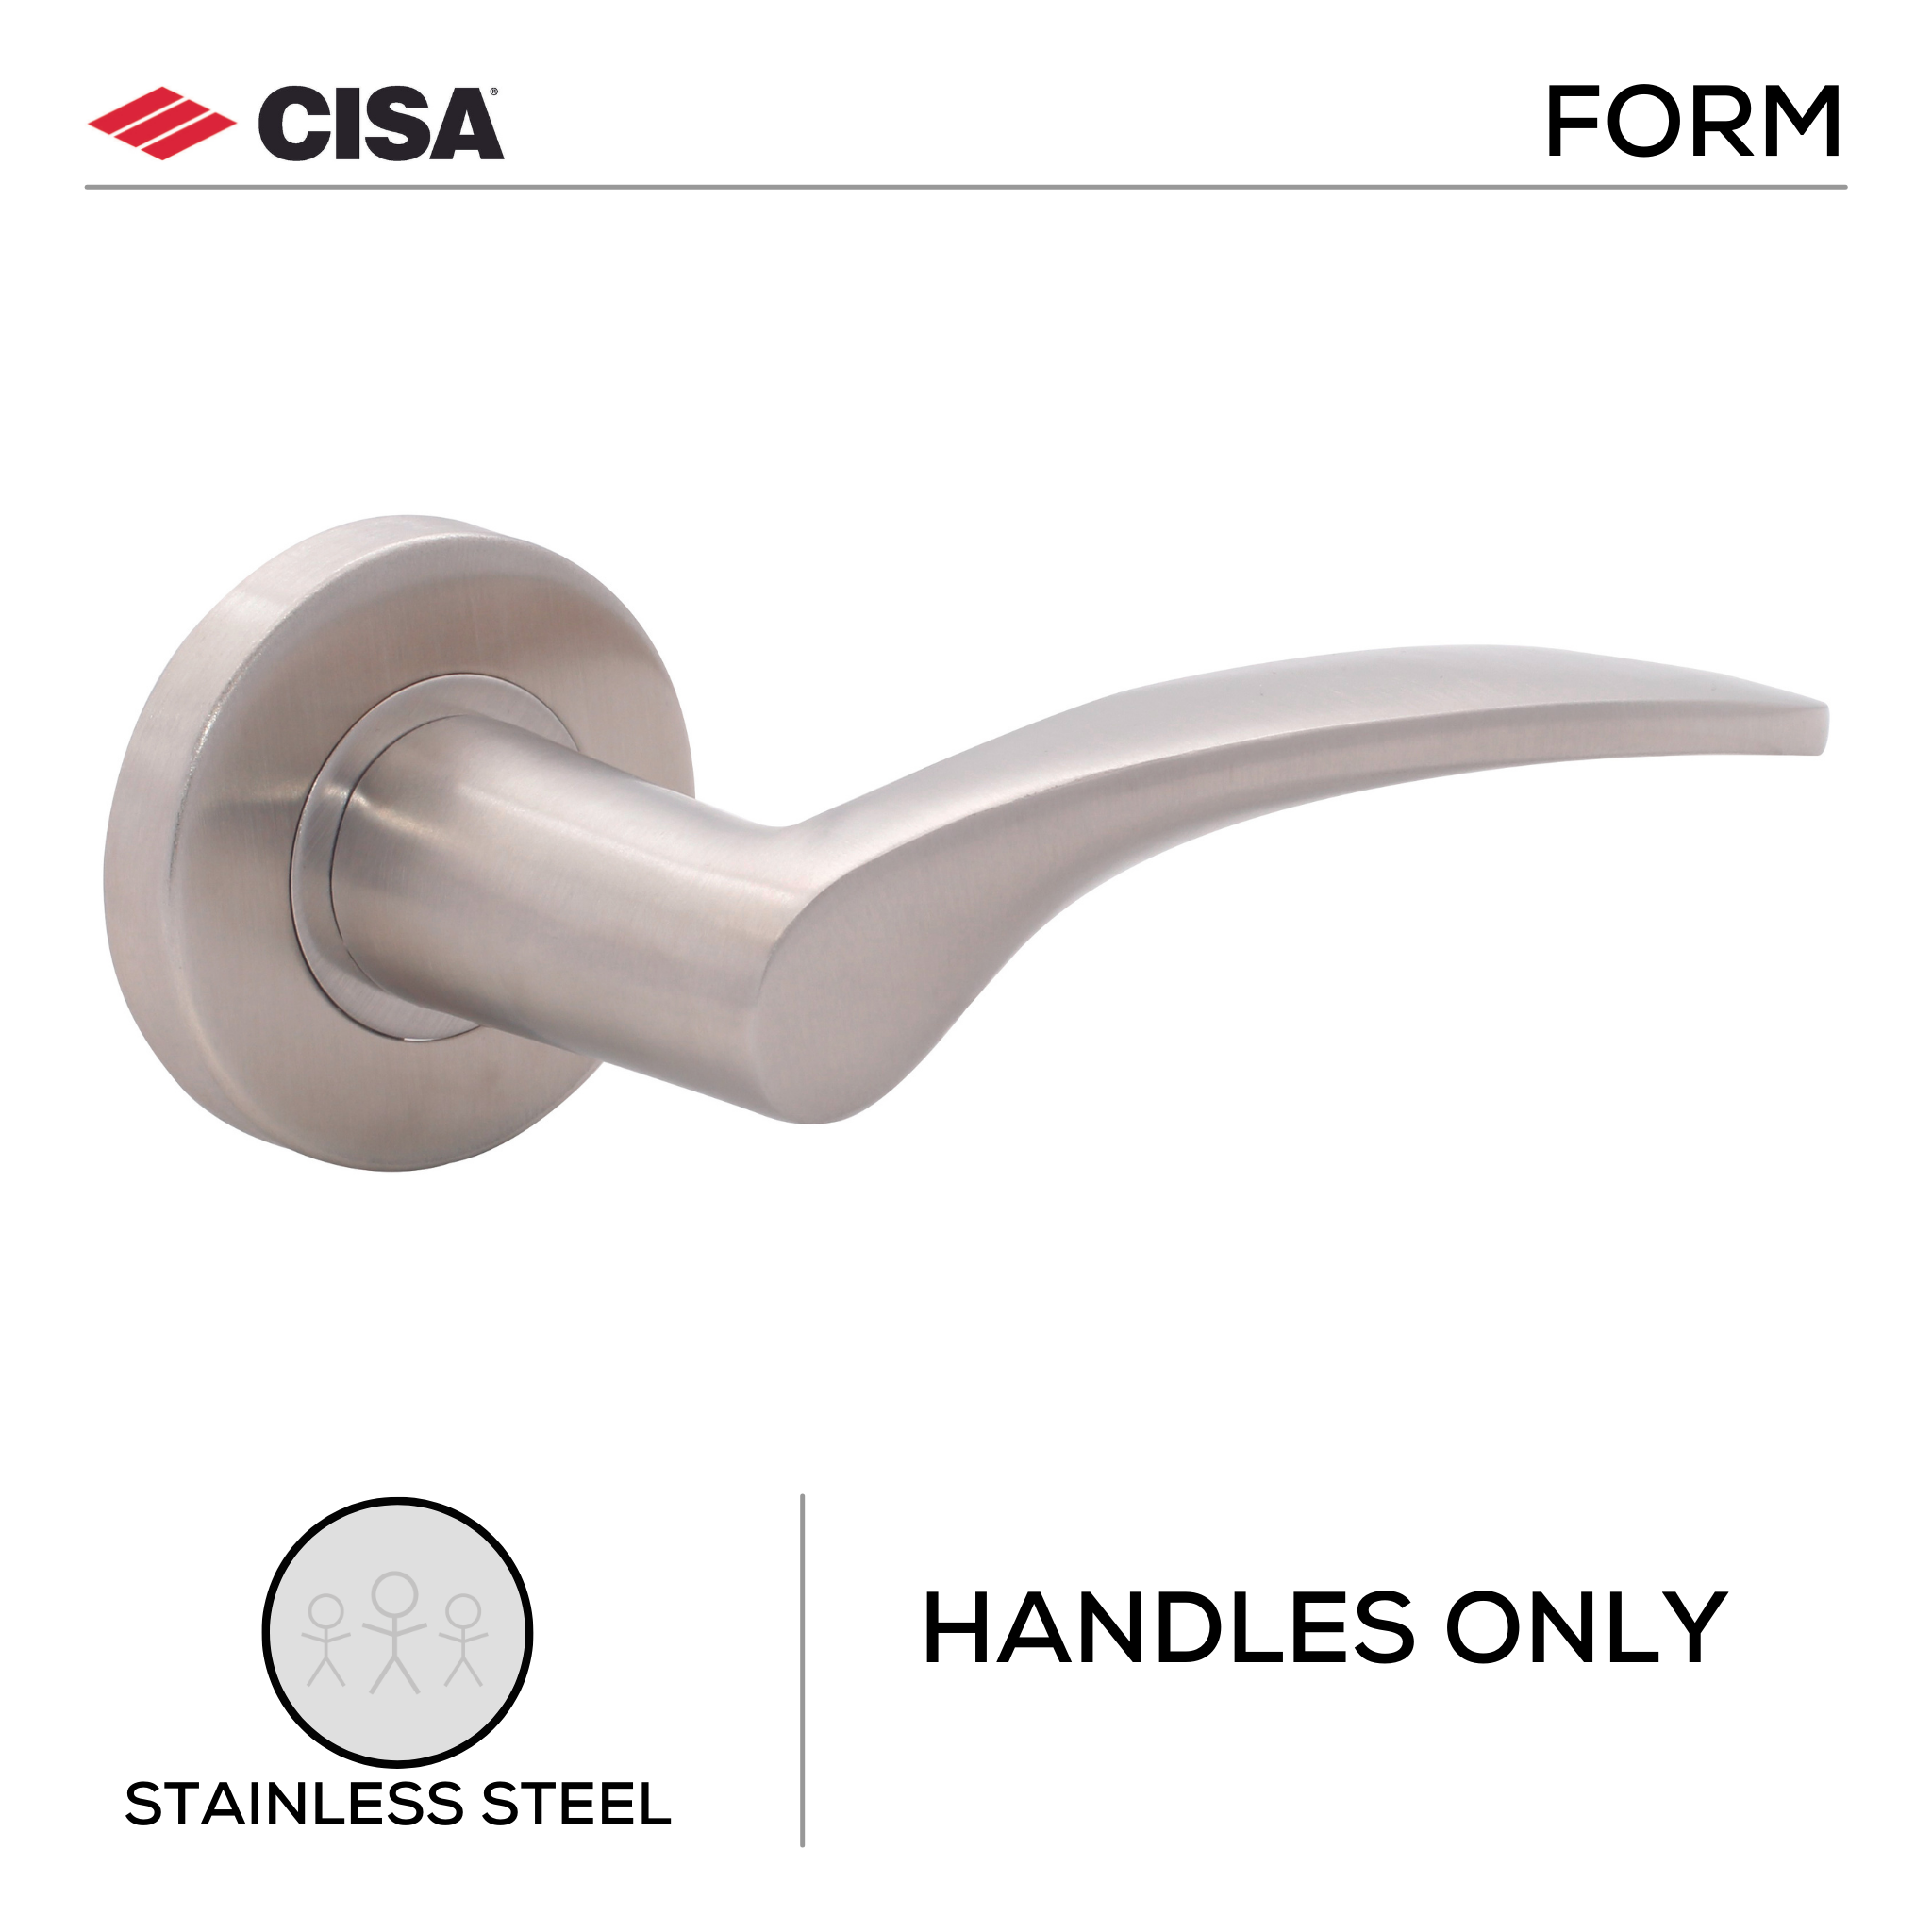 FS116.R.SS, Lever Handles, Form, On Round Rose, Handles Only, Stainless Steel, CISA